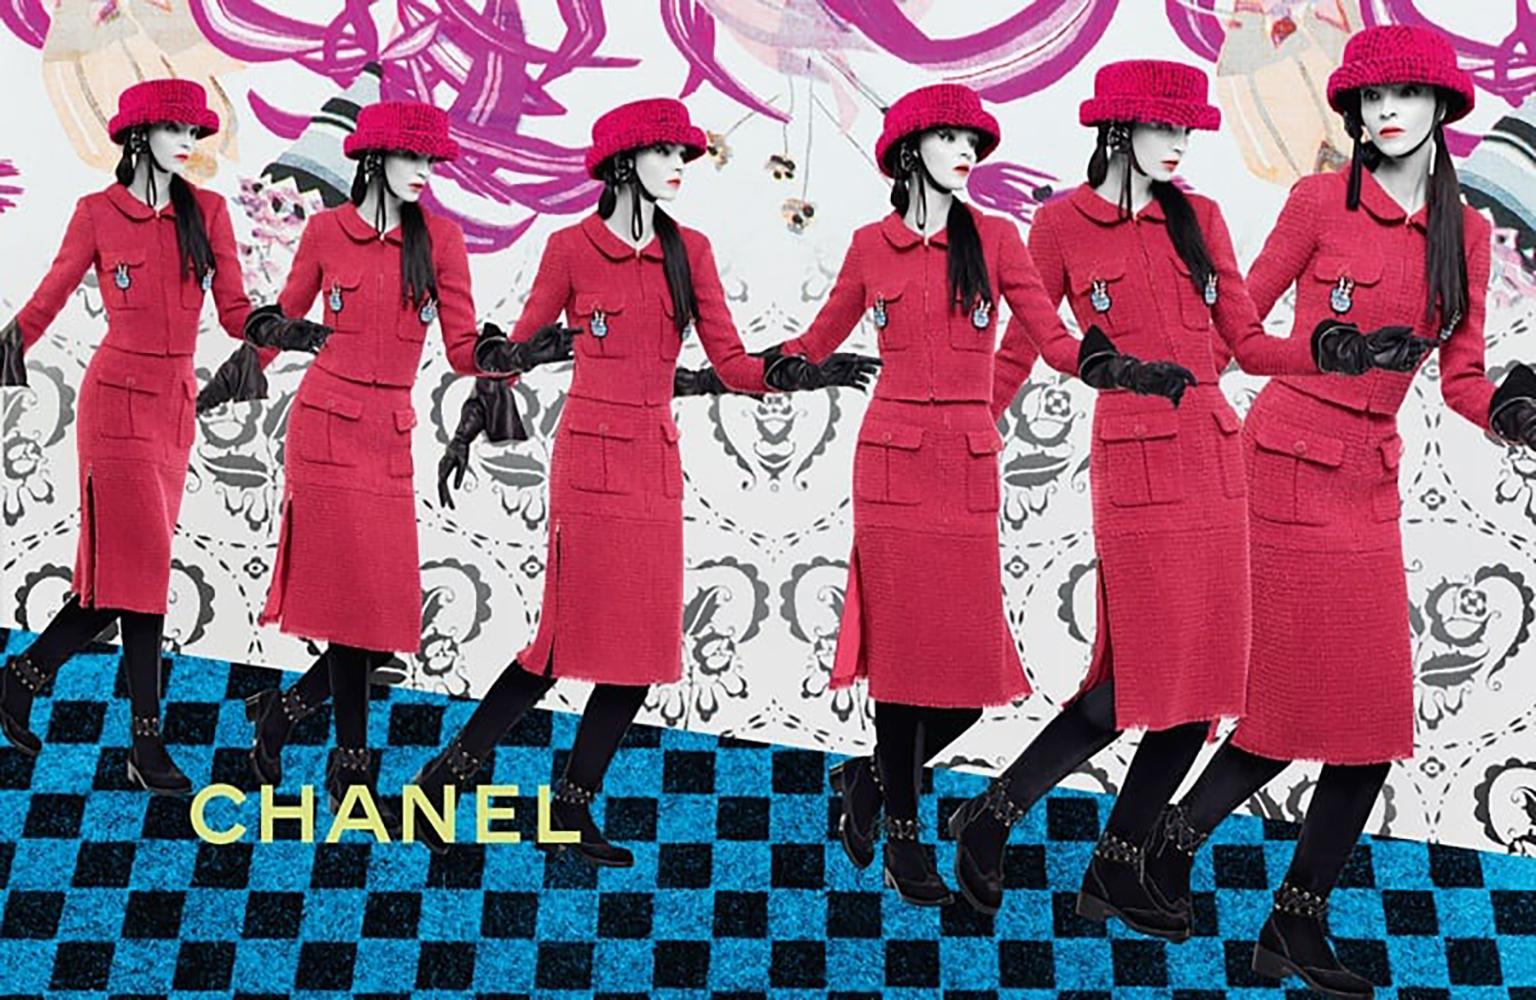 Runway Chanel lesage tweed ensemble (jacket and skirt) from Ad Campaign of 2016 Fall Collection by Karl Lagerfeld.
- CC logo tweed buttons
- made precious Lesage tweed in raspberry colour with shimmering threads
- tonal silk lining
Size mark 34 FR.